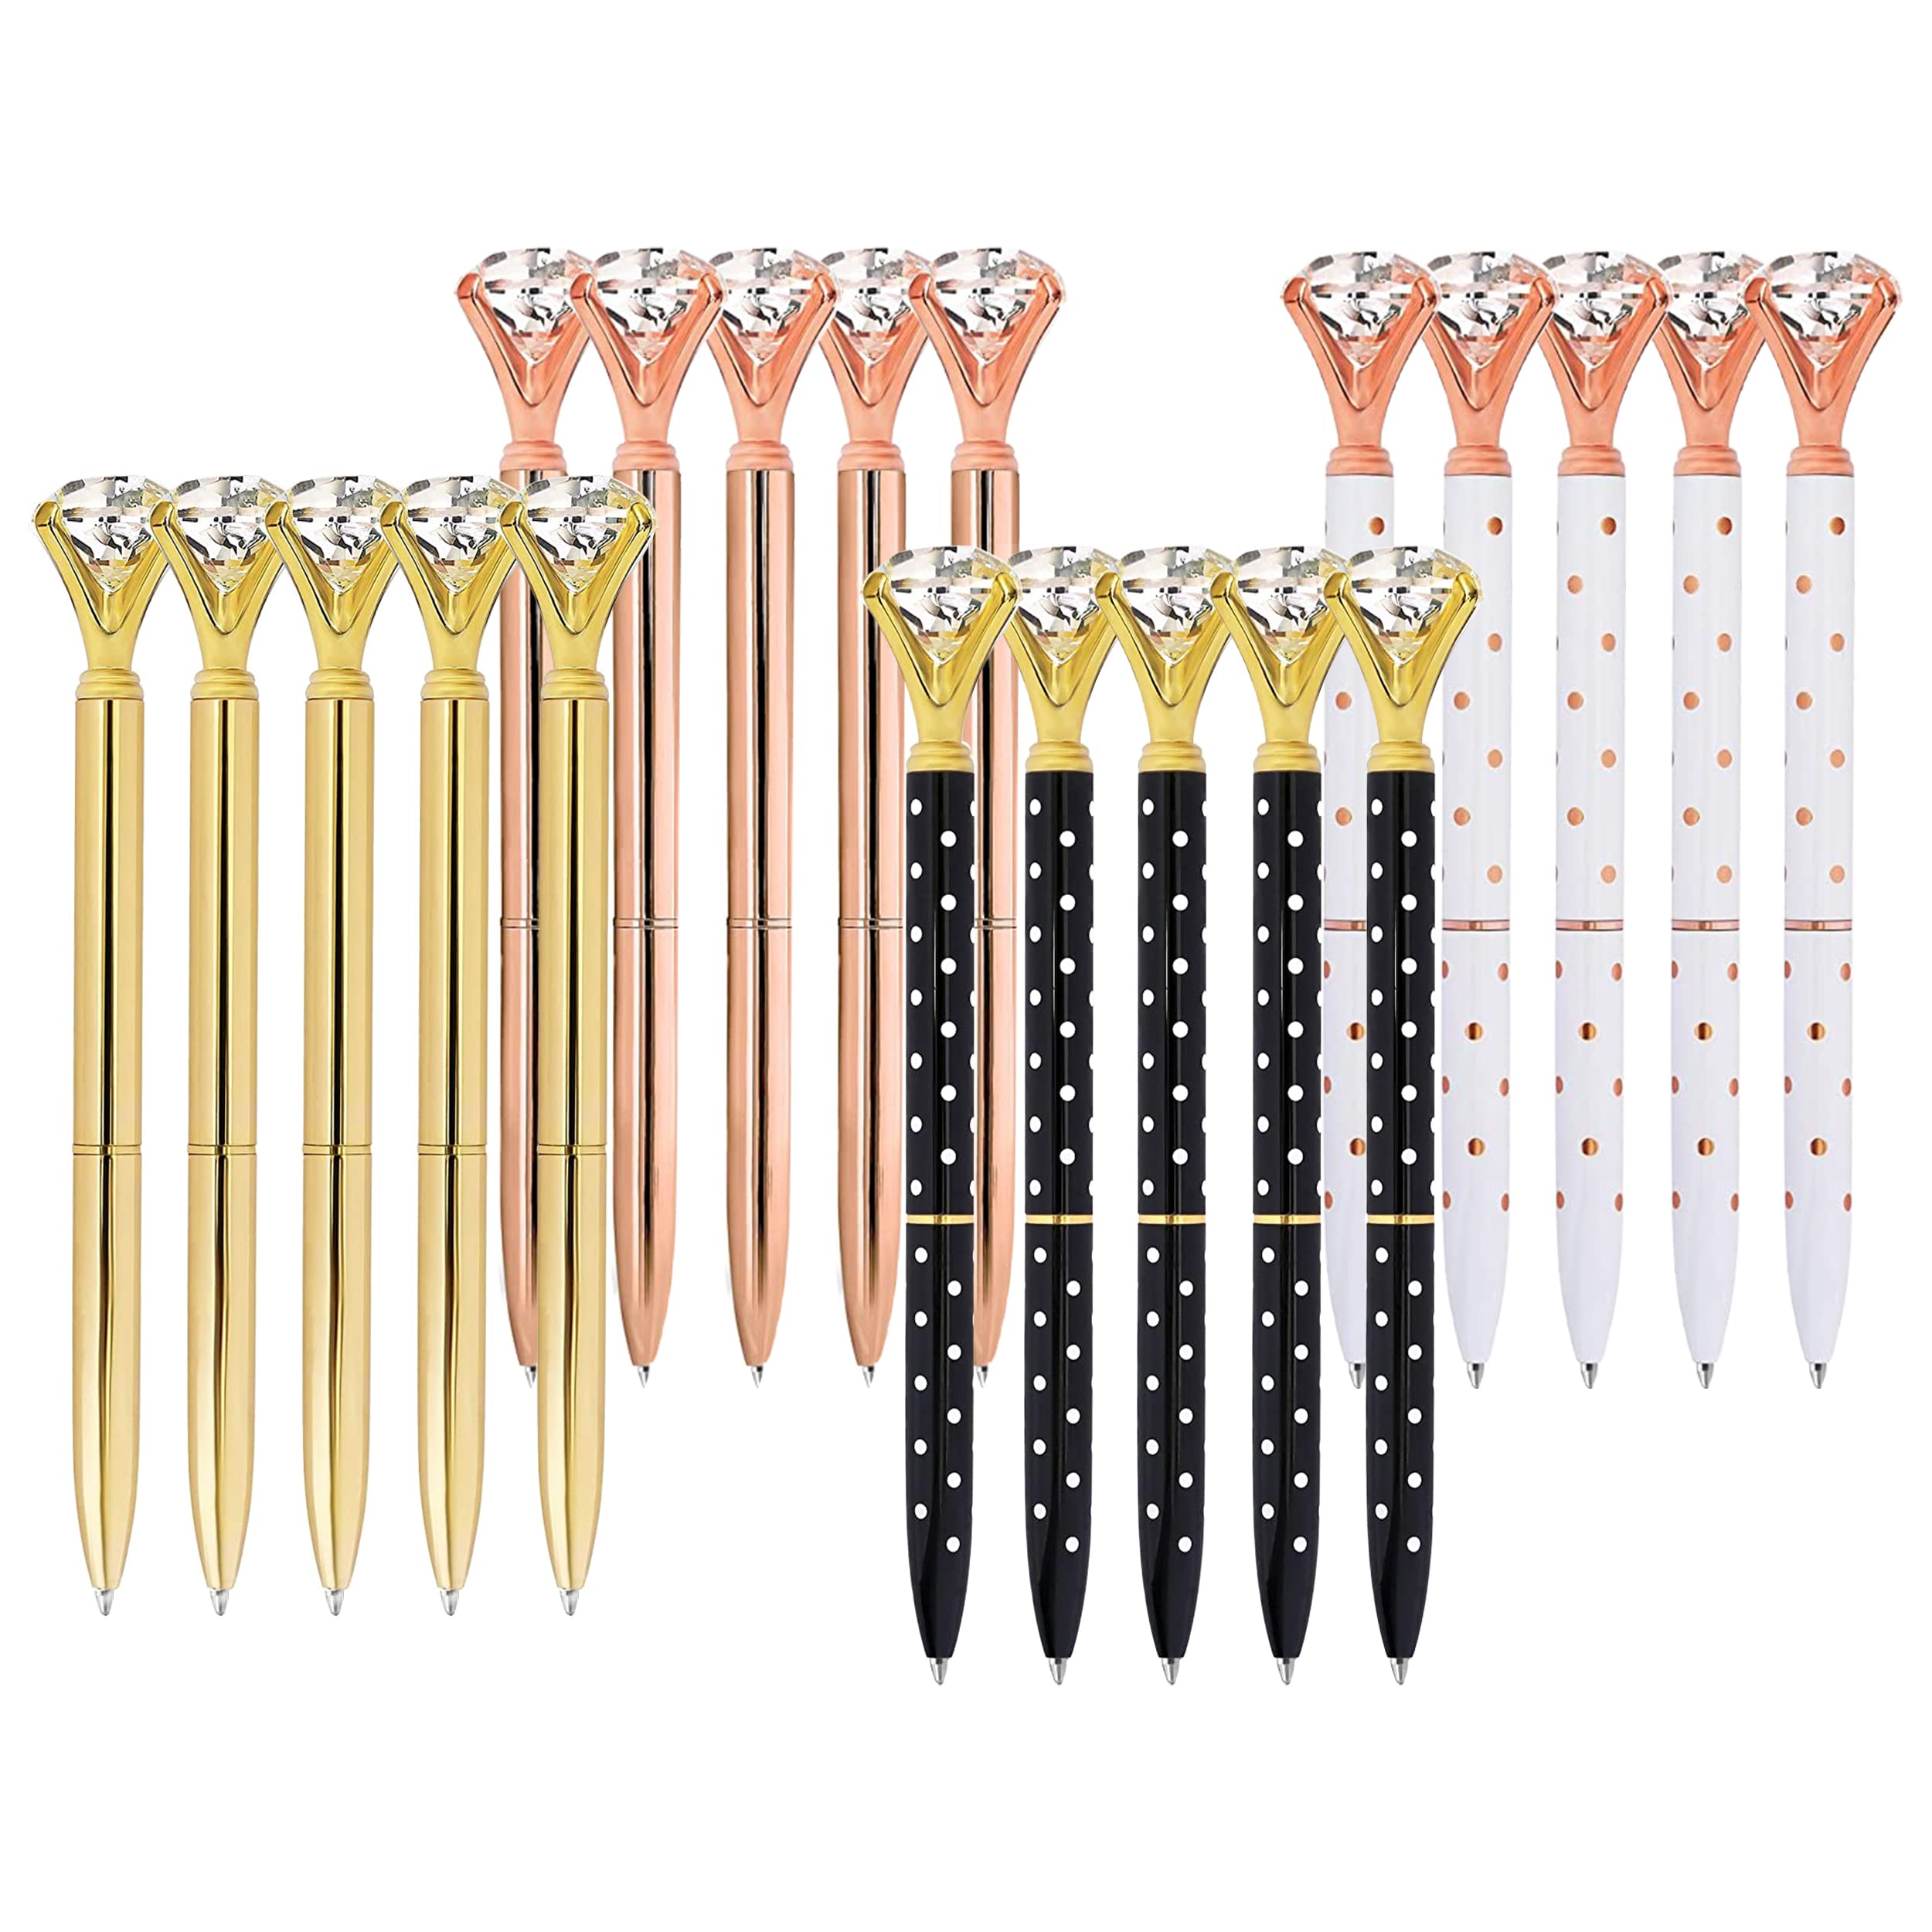 ETCBUYS Multi-Color Diamond Ballpoint Pen for Stylish Fancy Office Supplies- 20 Pack